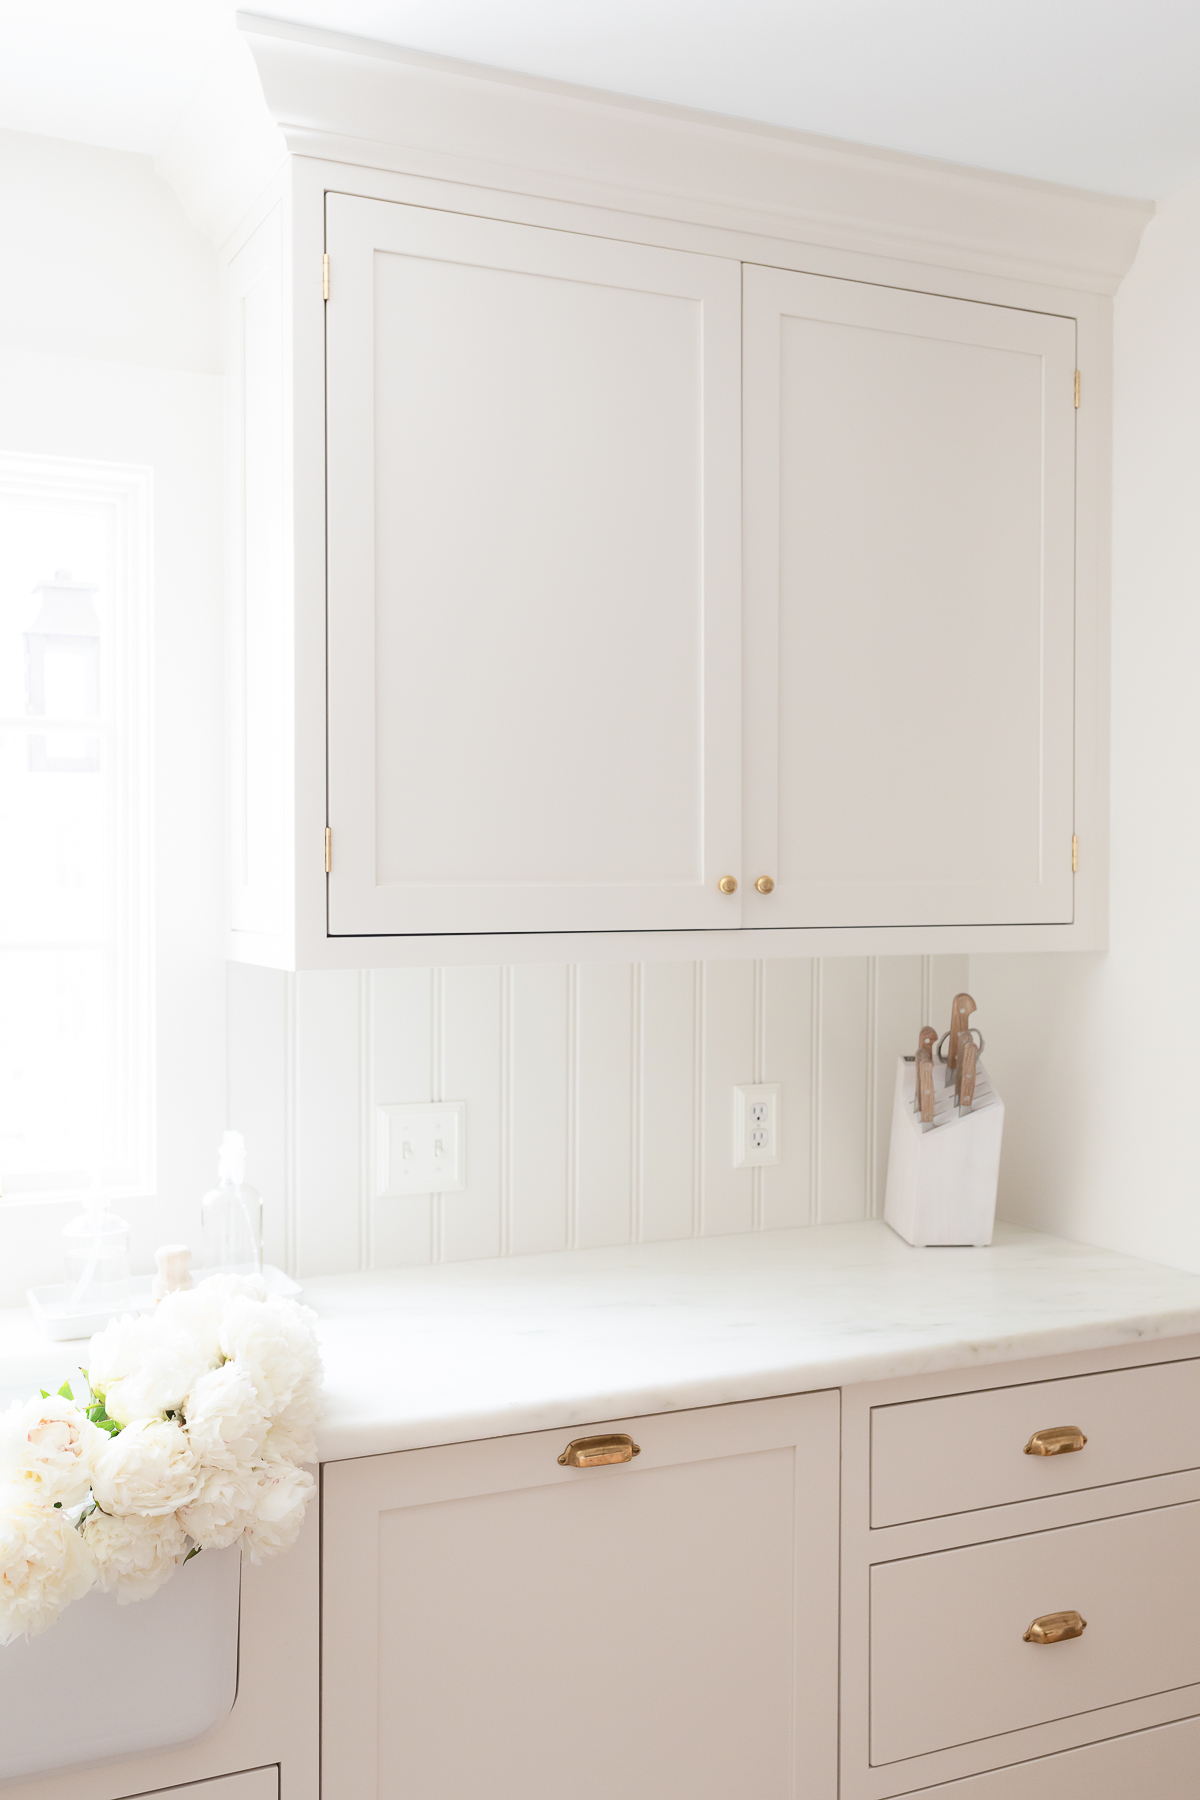 A white kitchen with a white sink and white cabinets. The perfect setting for gifts related to kitchen.